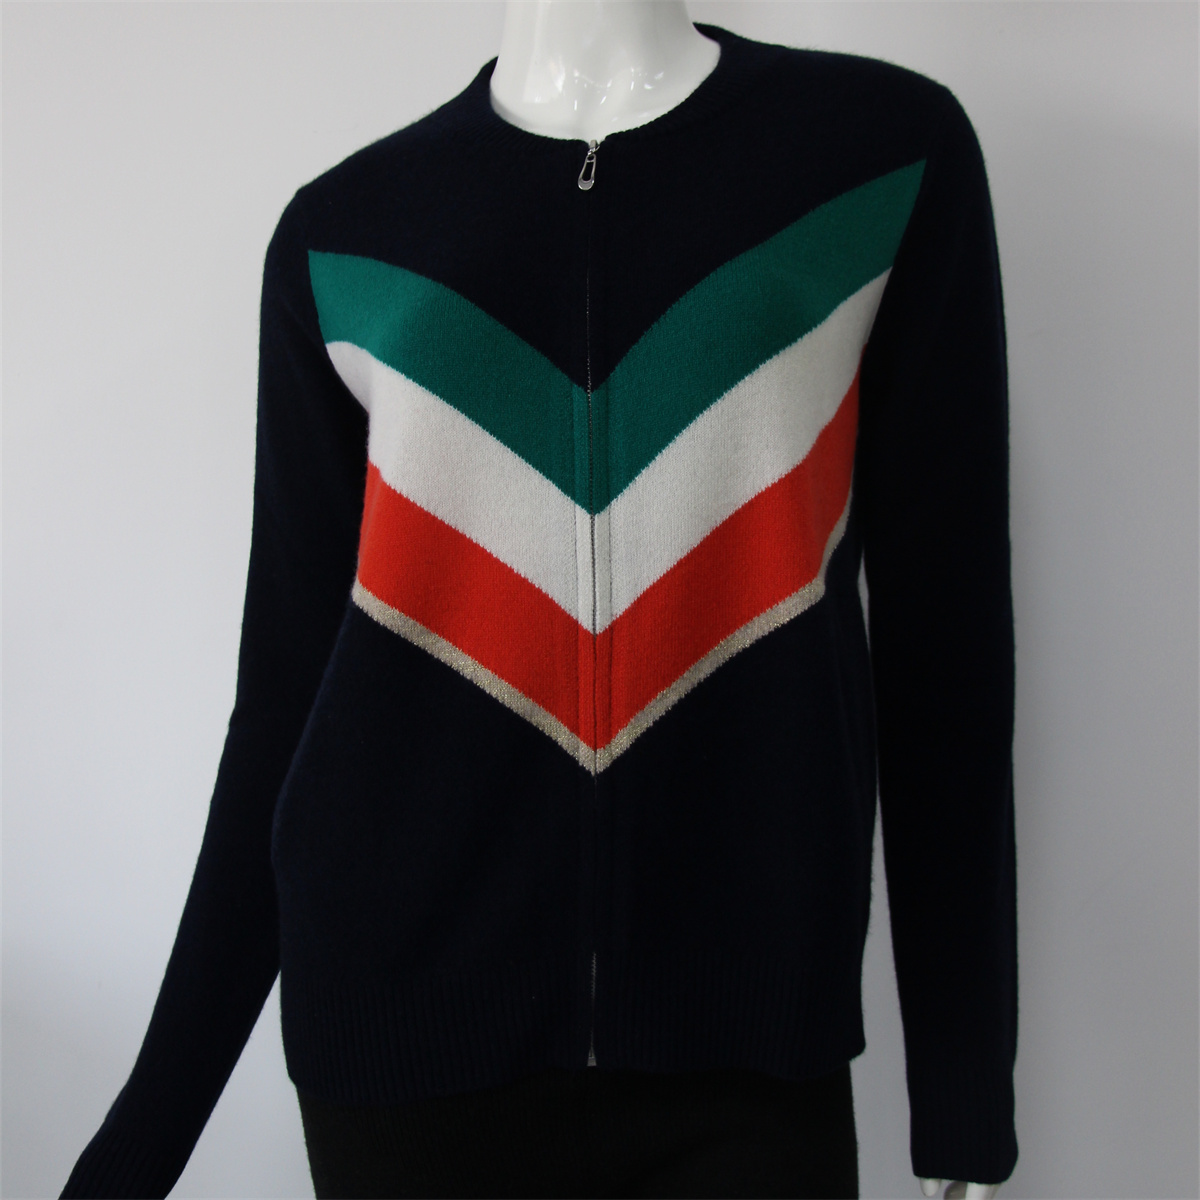 zipper cashmere jacket with rainbow contrast colors HN-AW1914